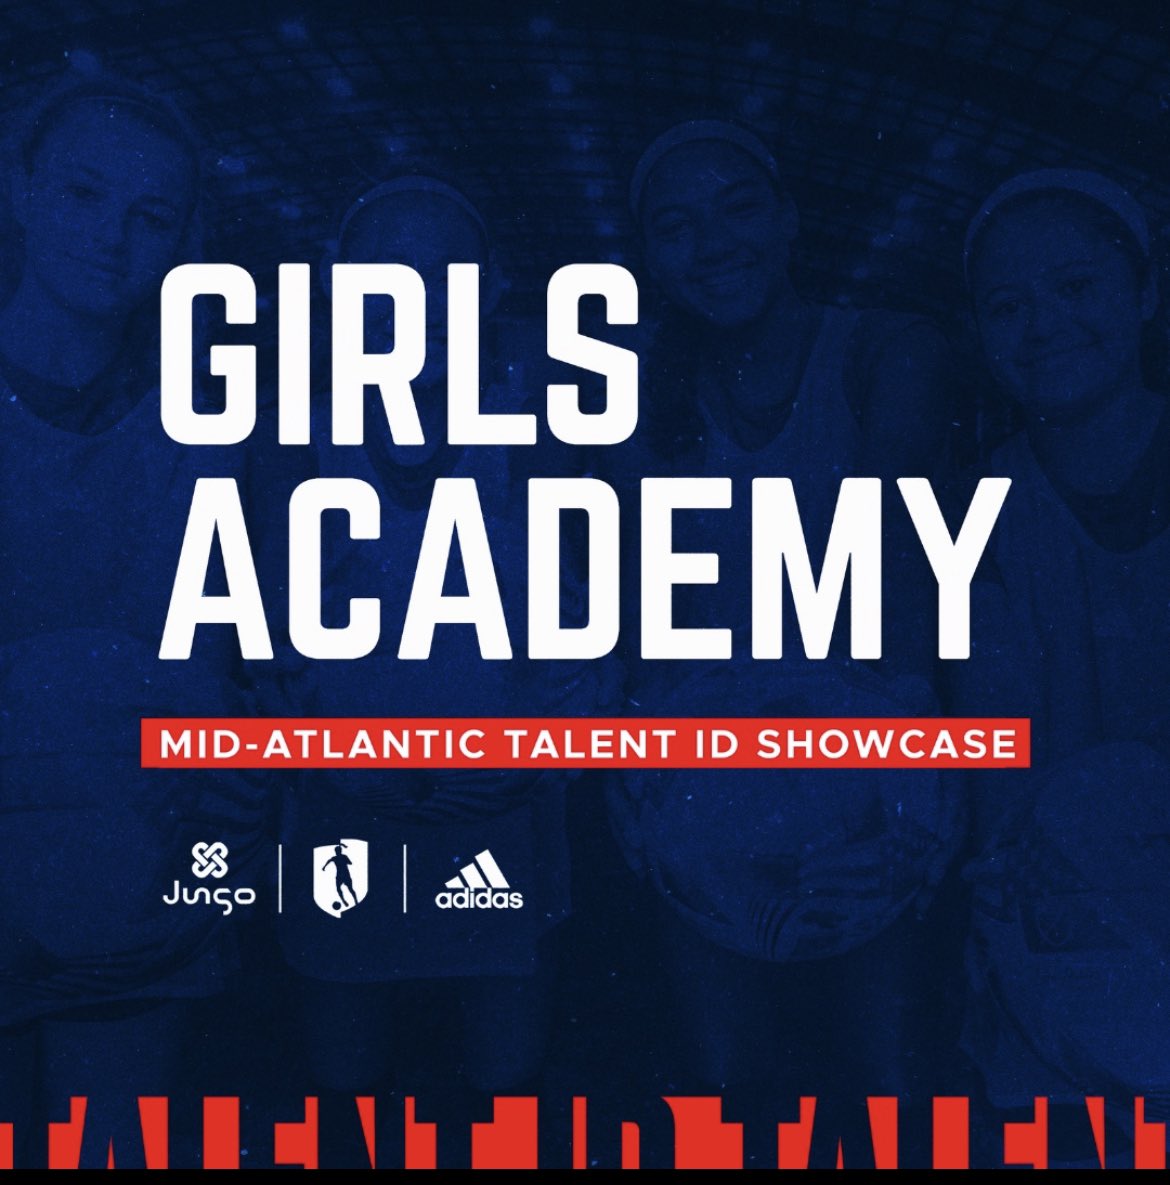 I am so excited to be invited to the Mid-Atlantic #GATalentID! Thank you for this opportunity! I can’t wait to compete with some of the top talent in our league. @GAcademyLeague @bobbypup @tt7 @CCZ_FCV @TSJ_FCVirginia @TopDrawerSoccer @PrepSoccer